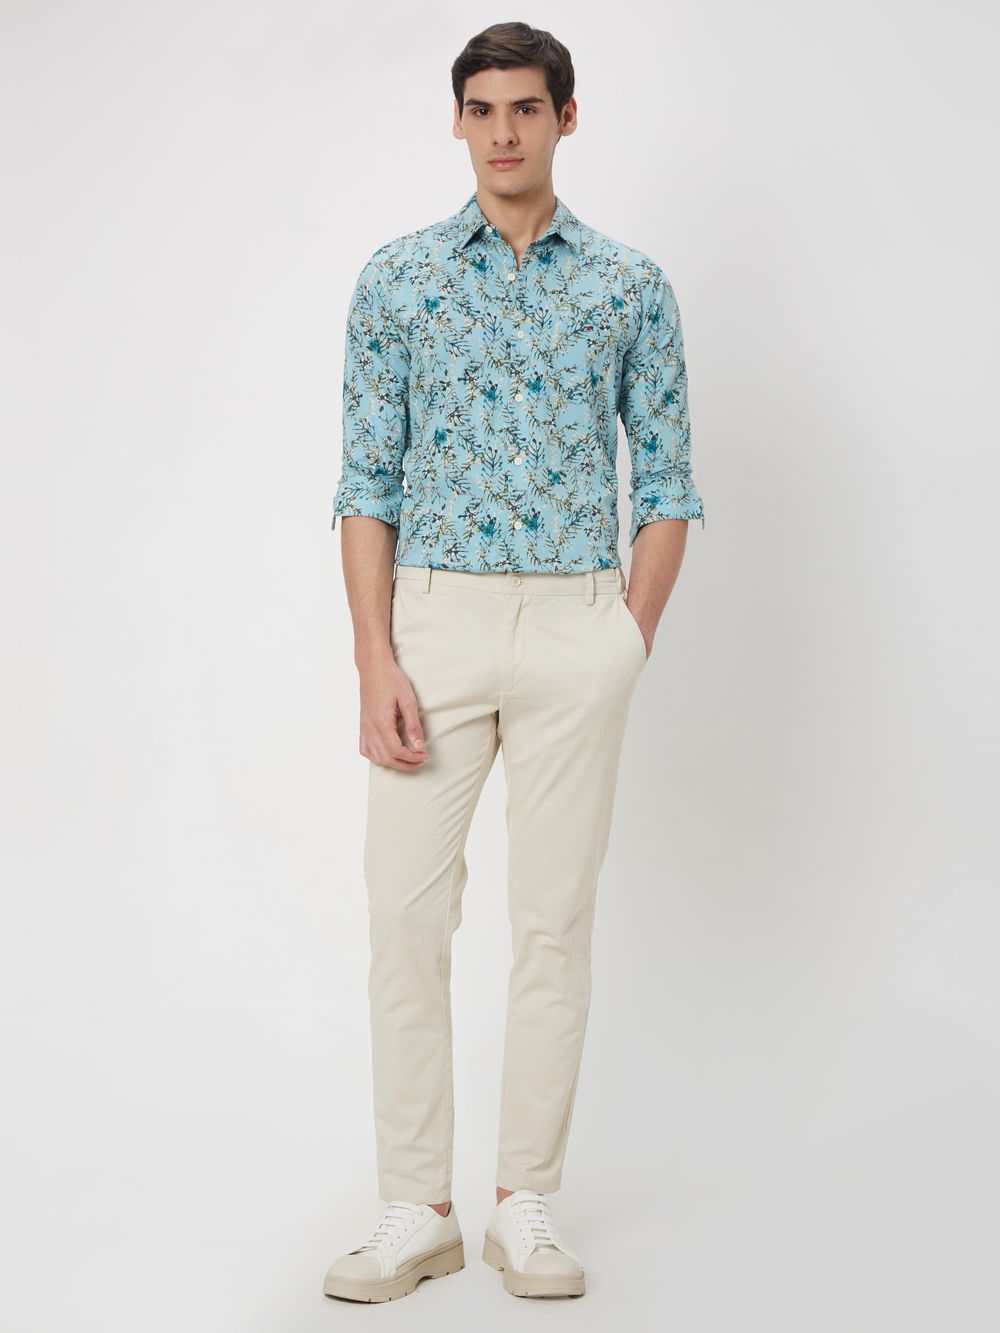 Turquoise & Multi Floral Print Slim Fit Casual Shirt